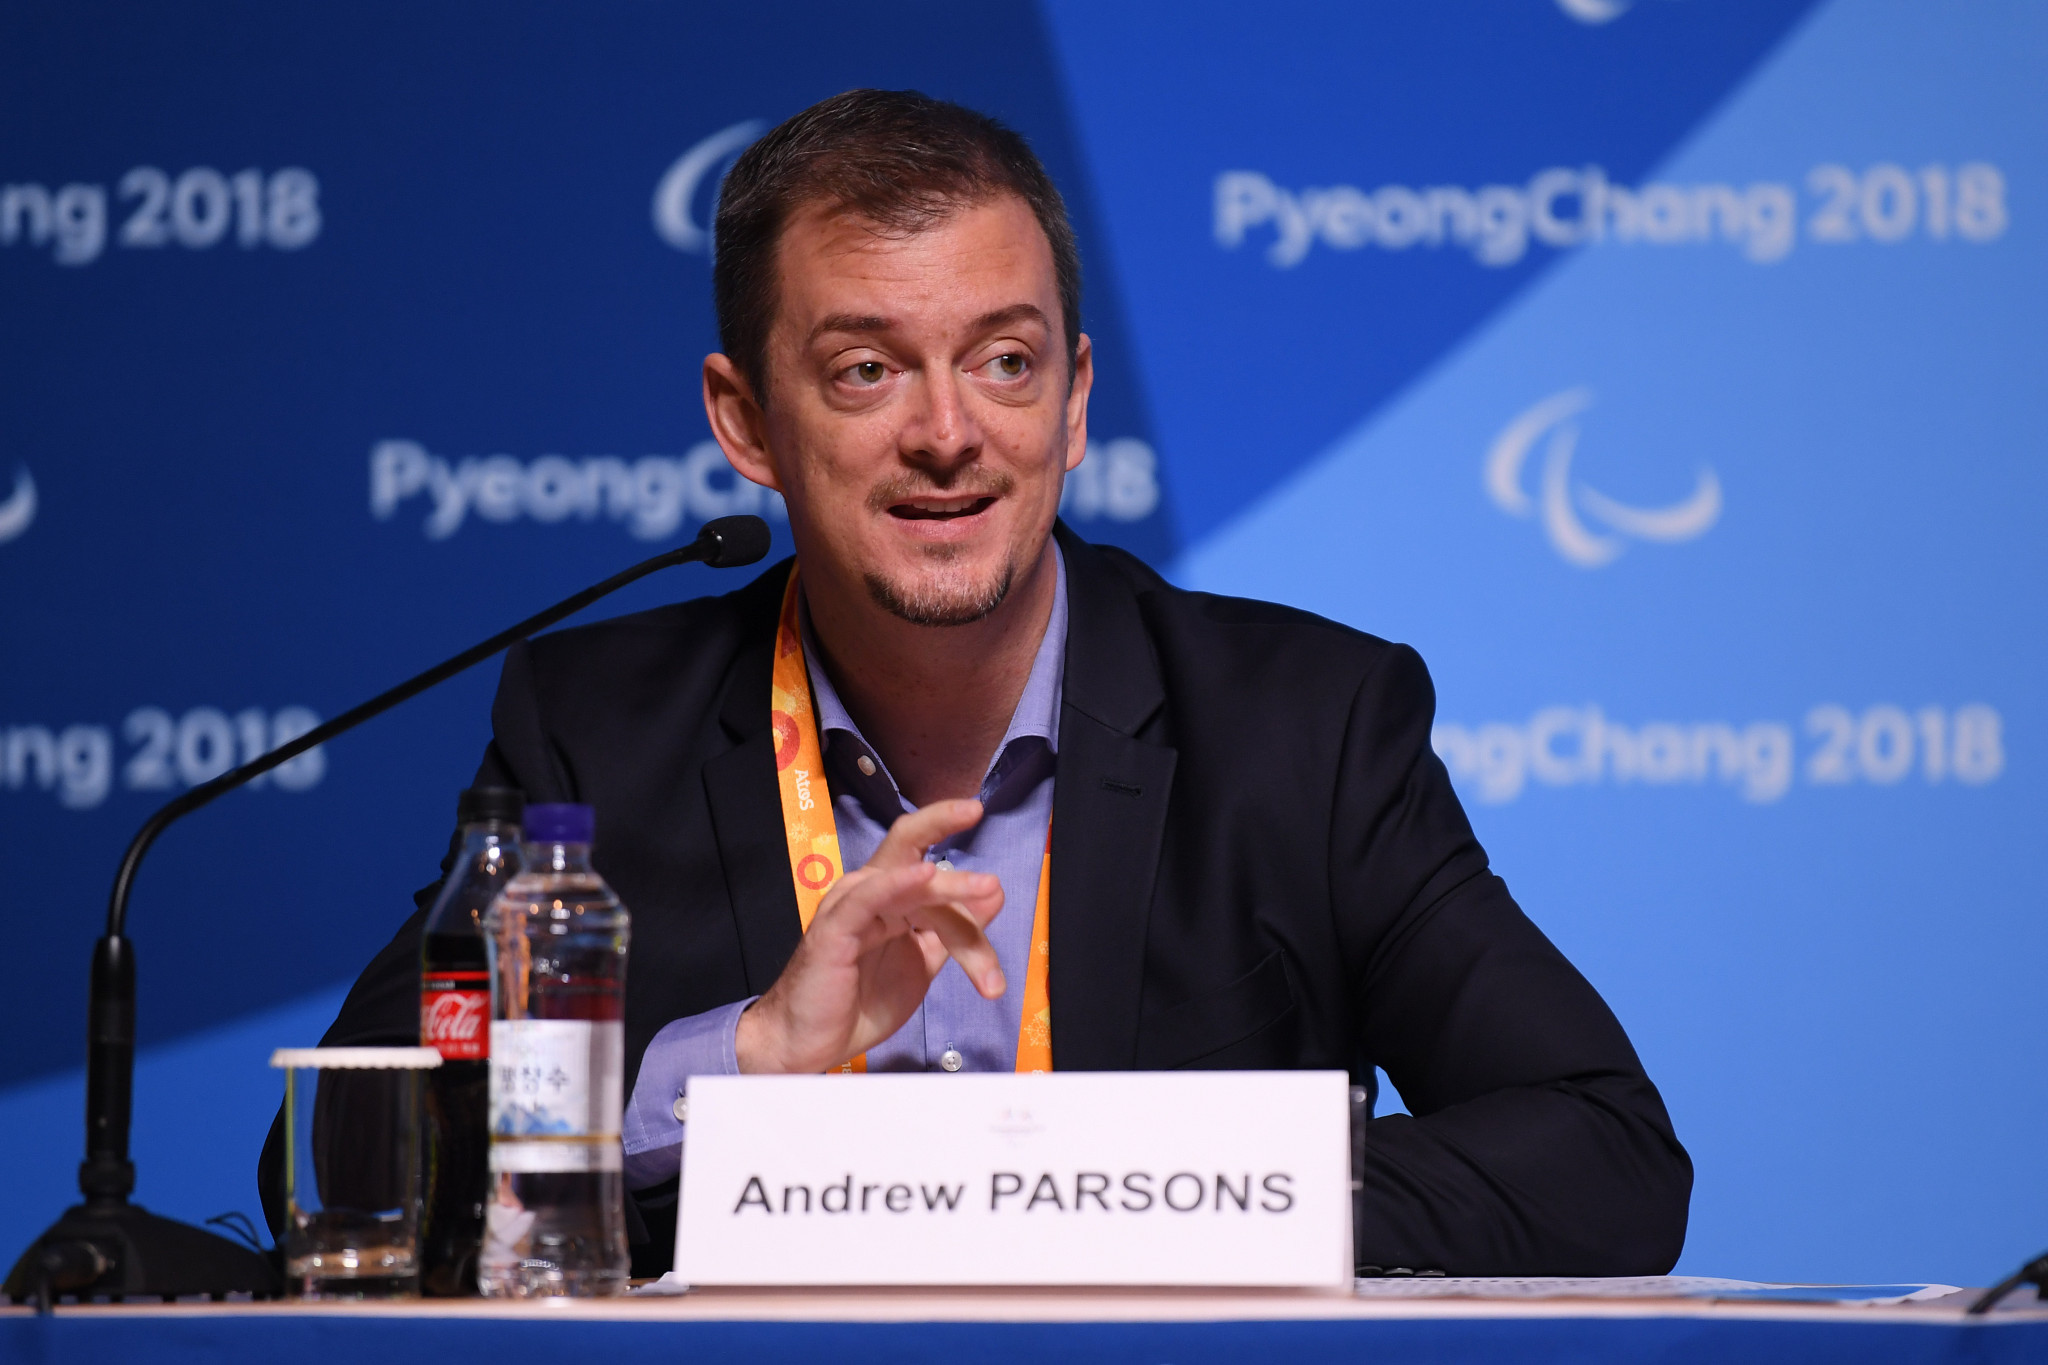 IPC President claims classification will not be an issue at Pyeongchang 2018